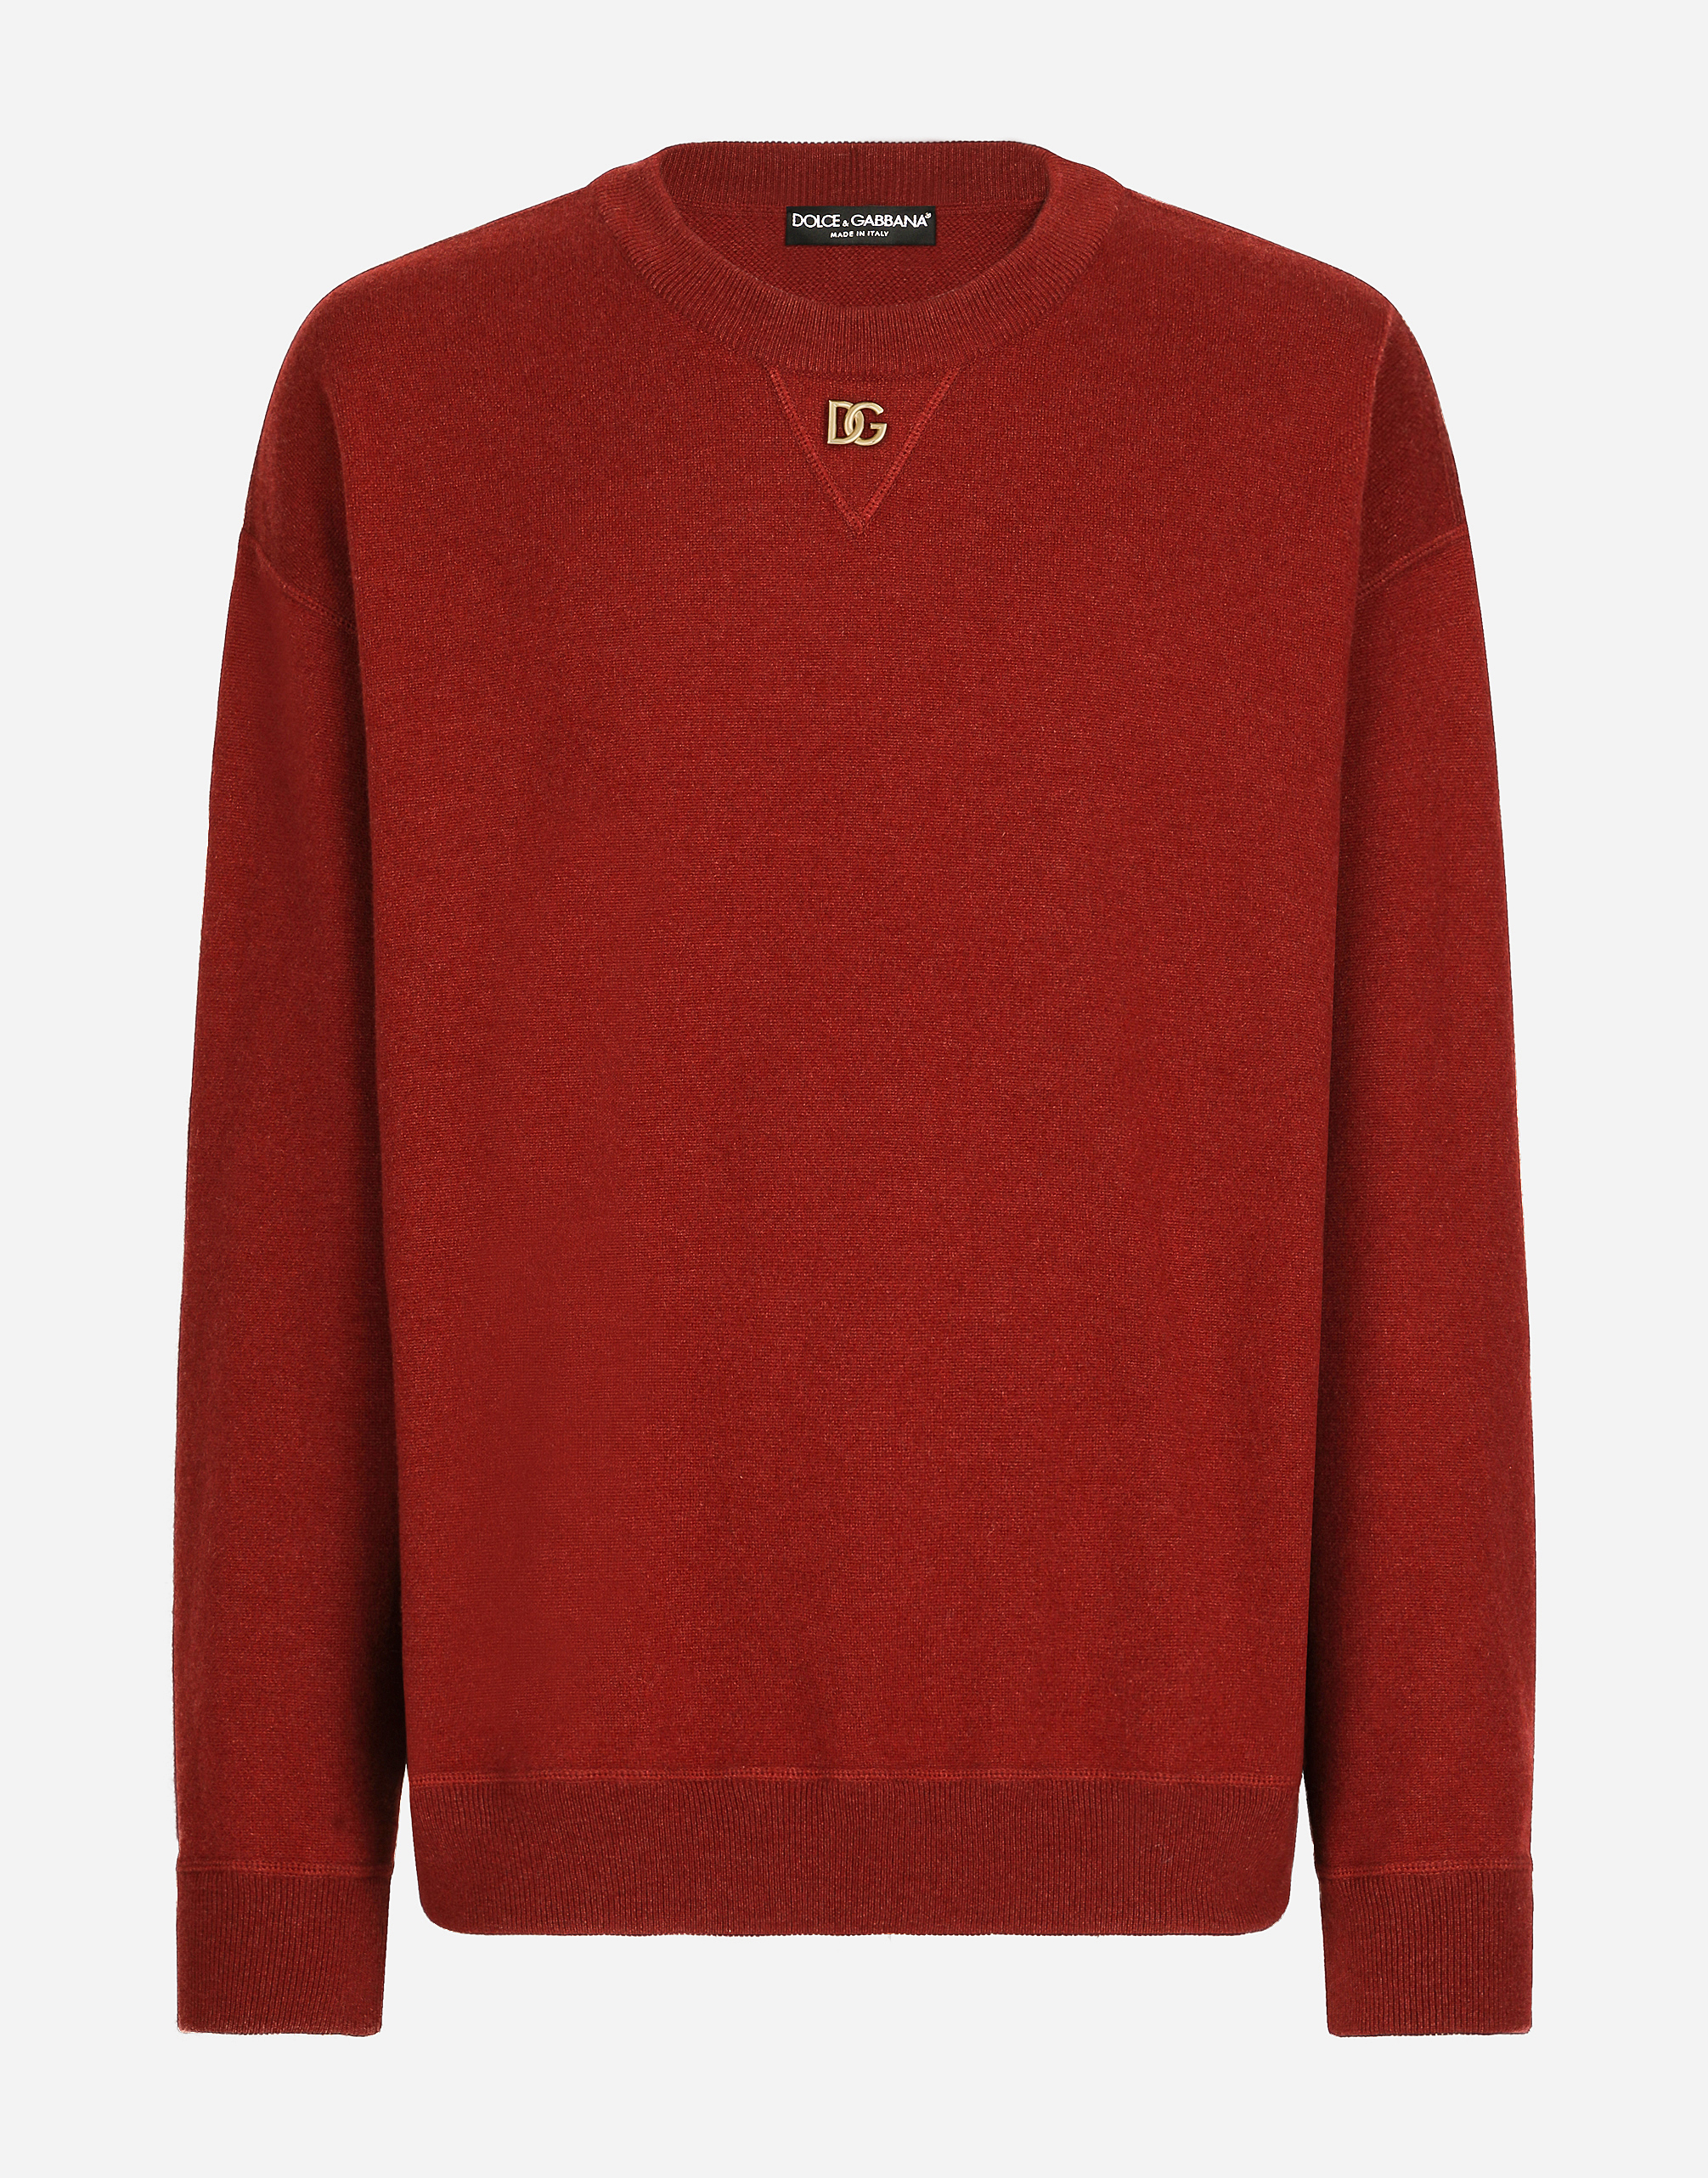 Cashmere round-neck sweater with DG logo in Bordeaux